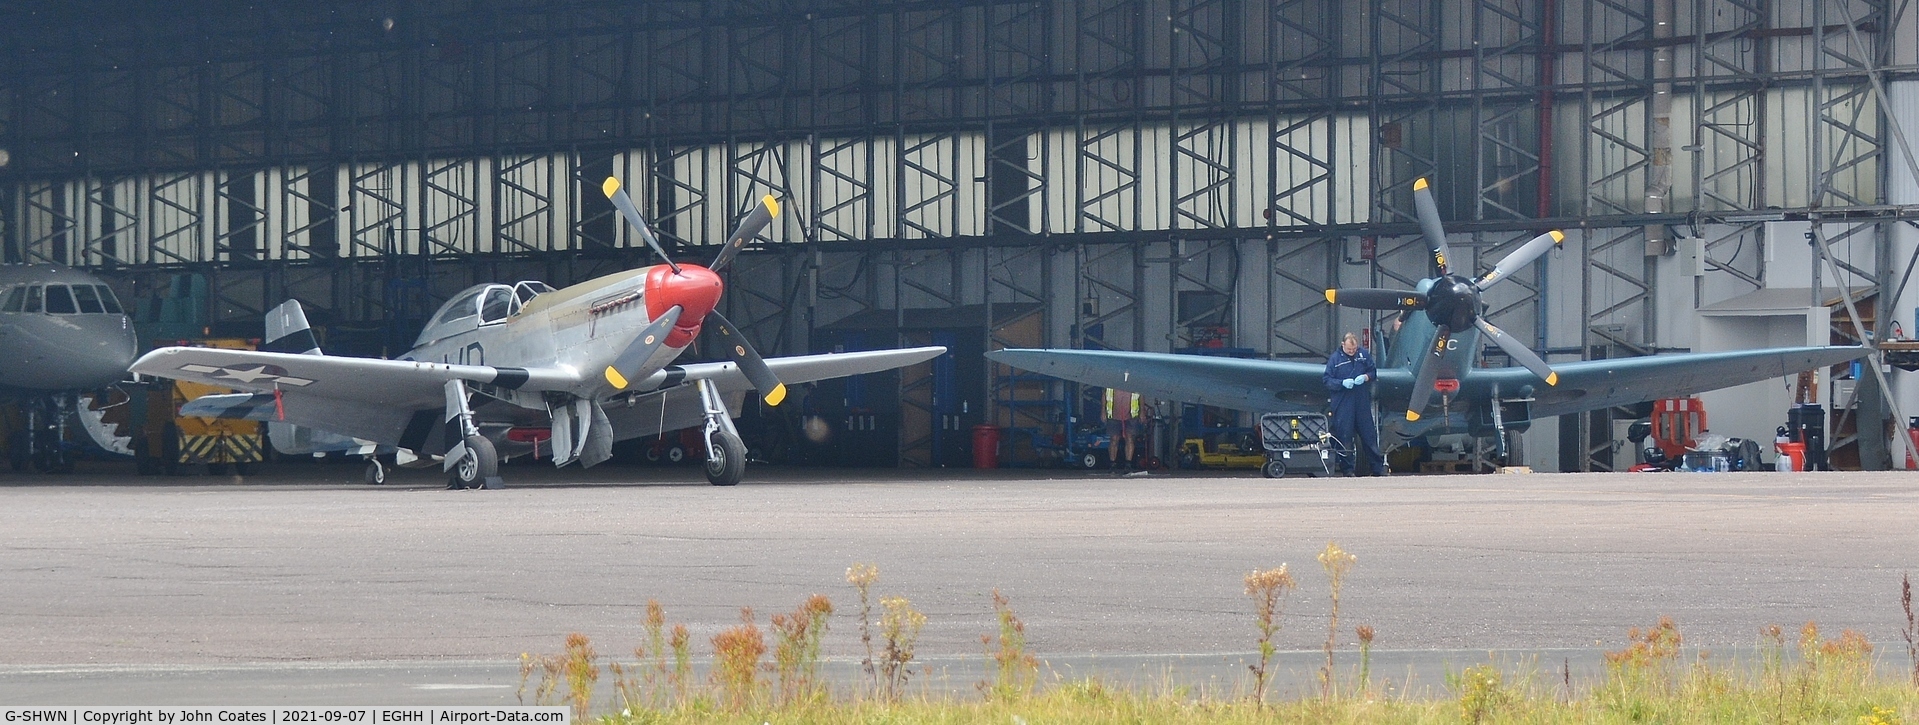 G-SHWN, 1944 North American P-51D Mustang C/N 122-40417, Overnight parking with Rolls Royce Spitfire PS853